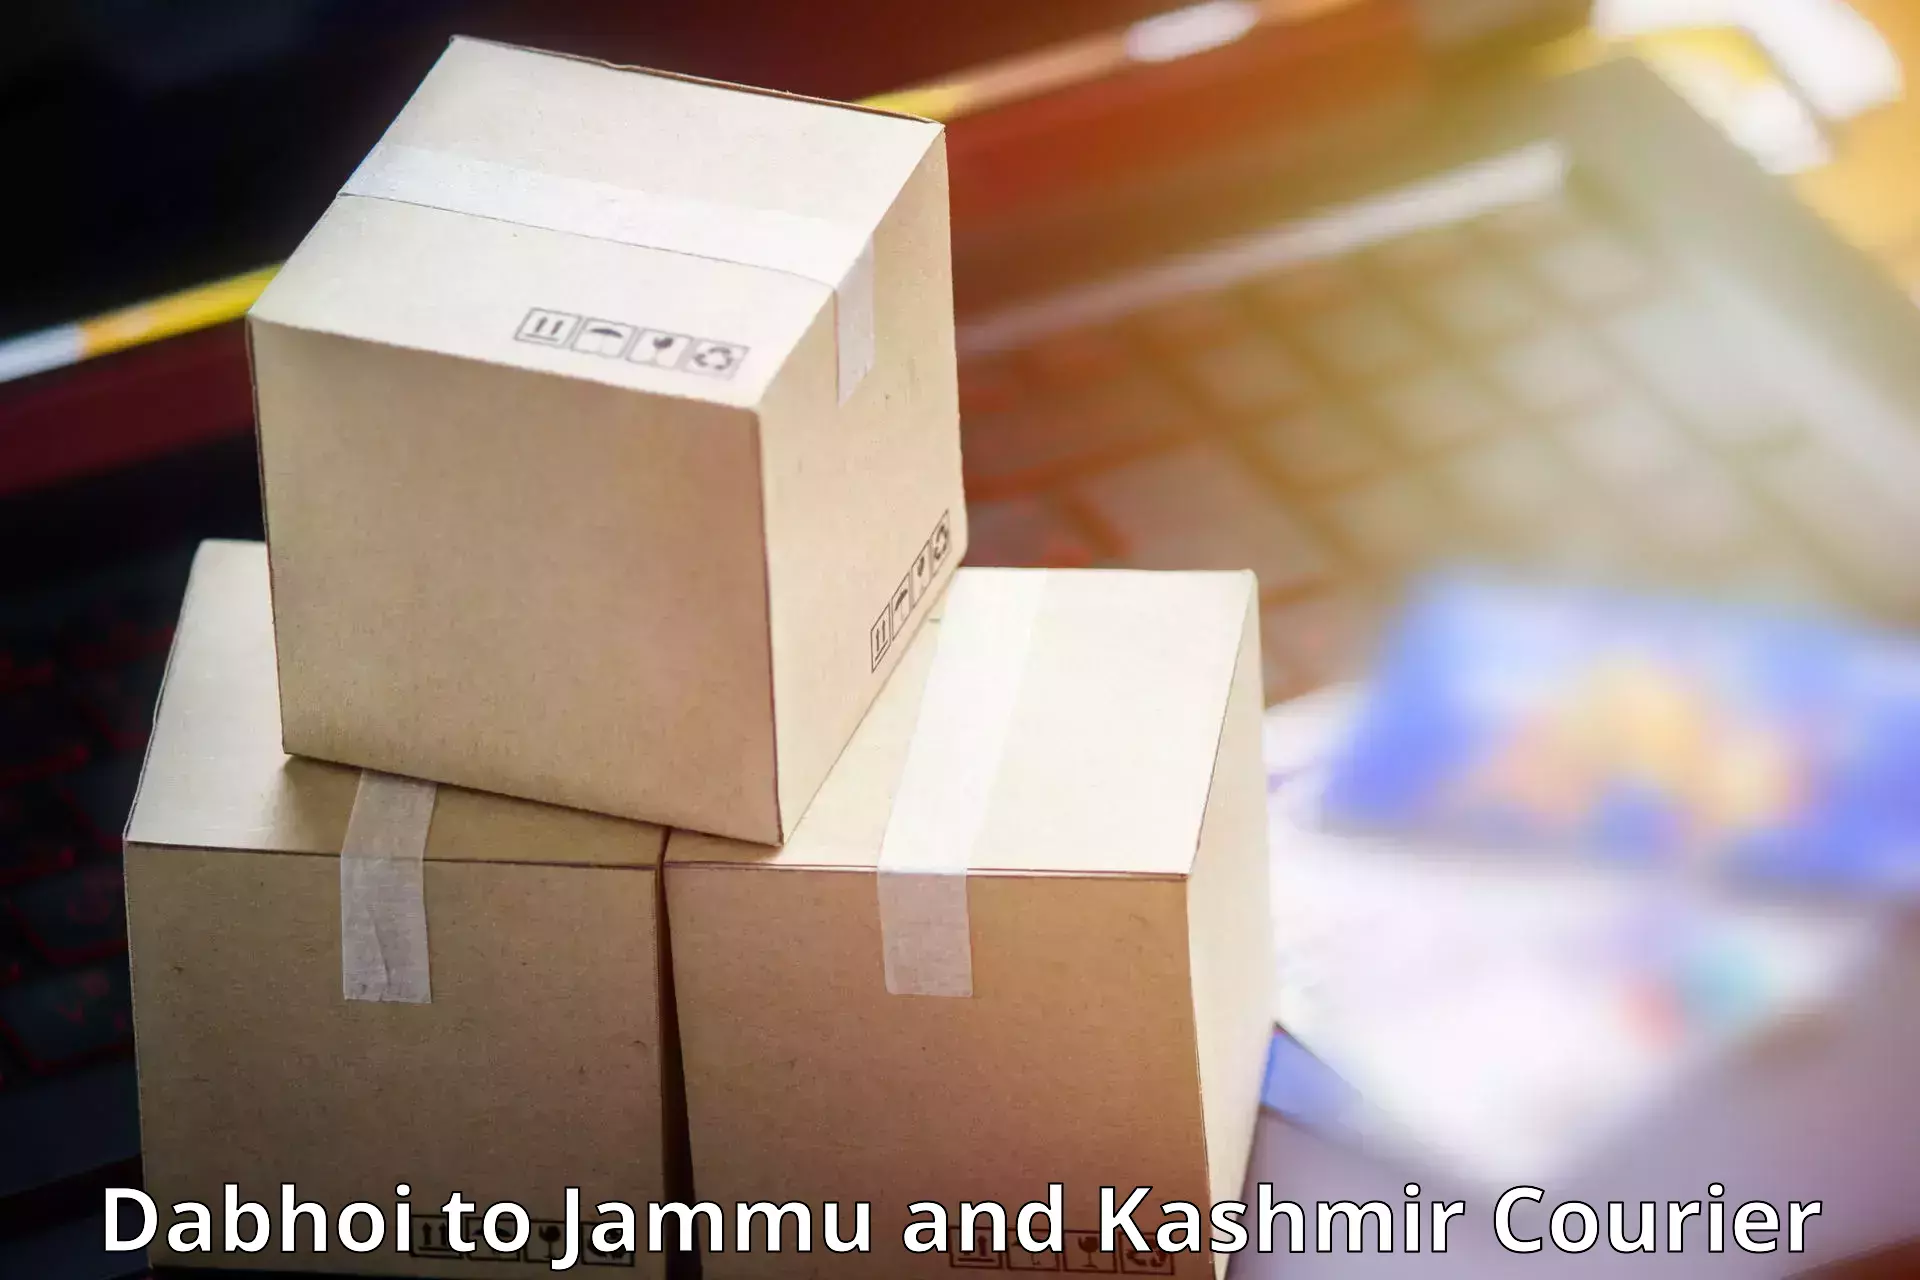 Easy access courier services Dabhoi to University of Jammu